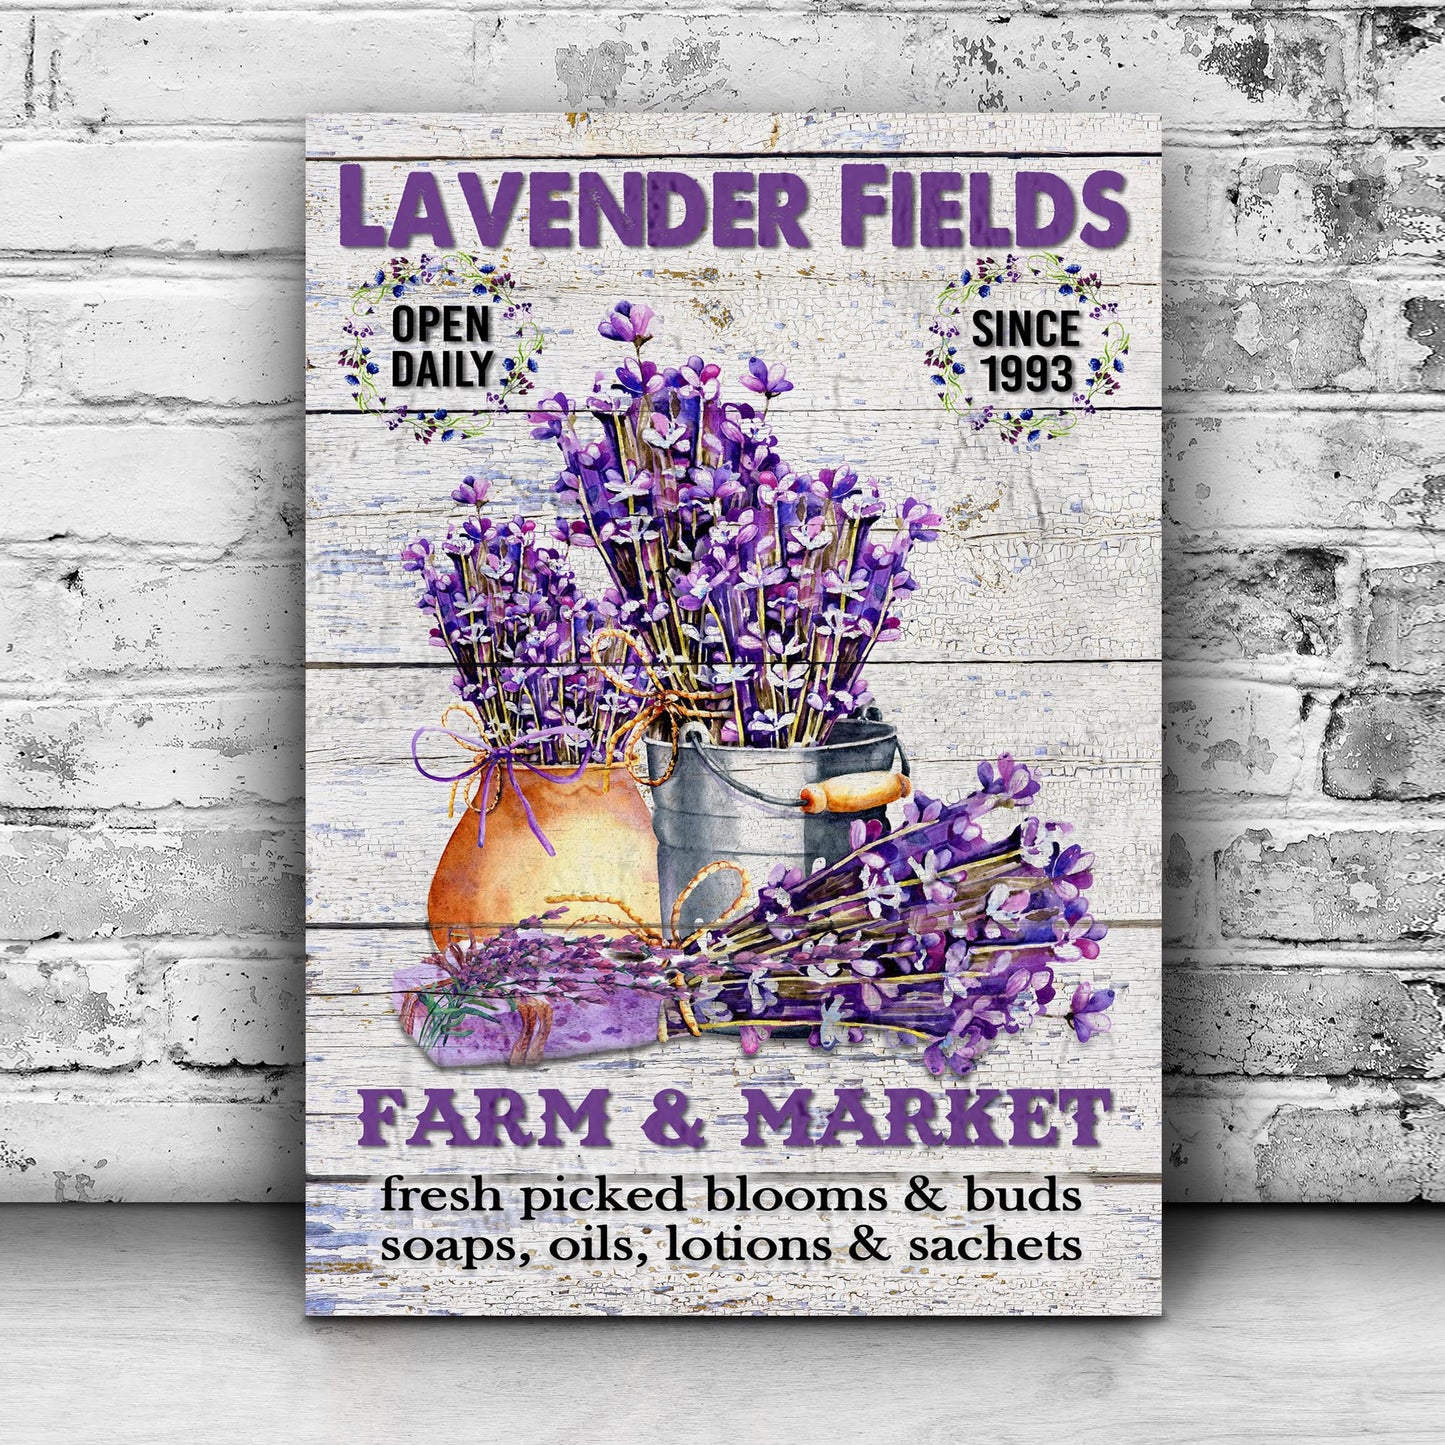 Lavender Fields Farm & Market Sign Style 2 - Image by Tailored Canvases